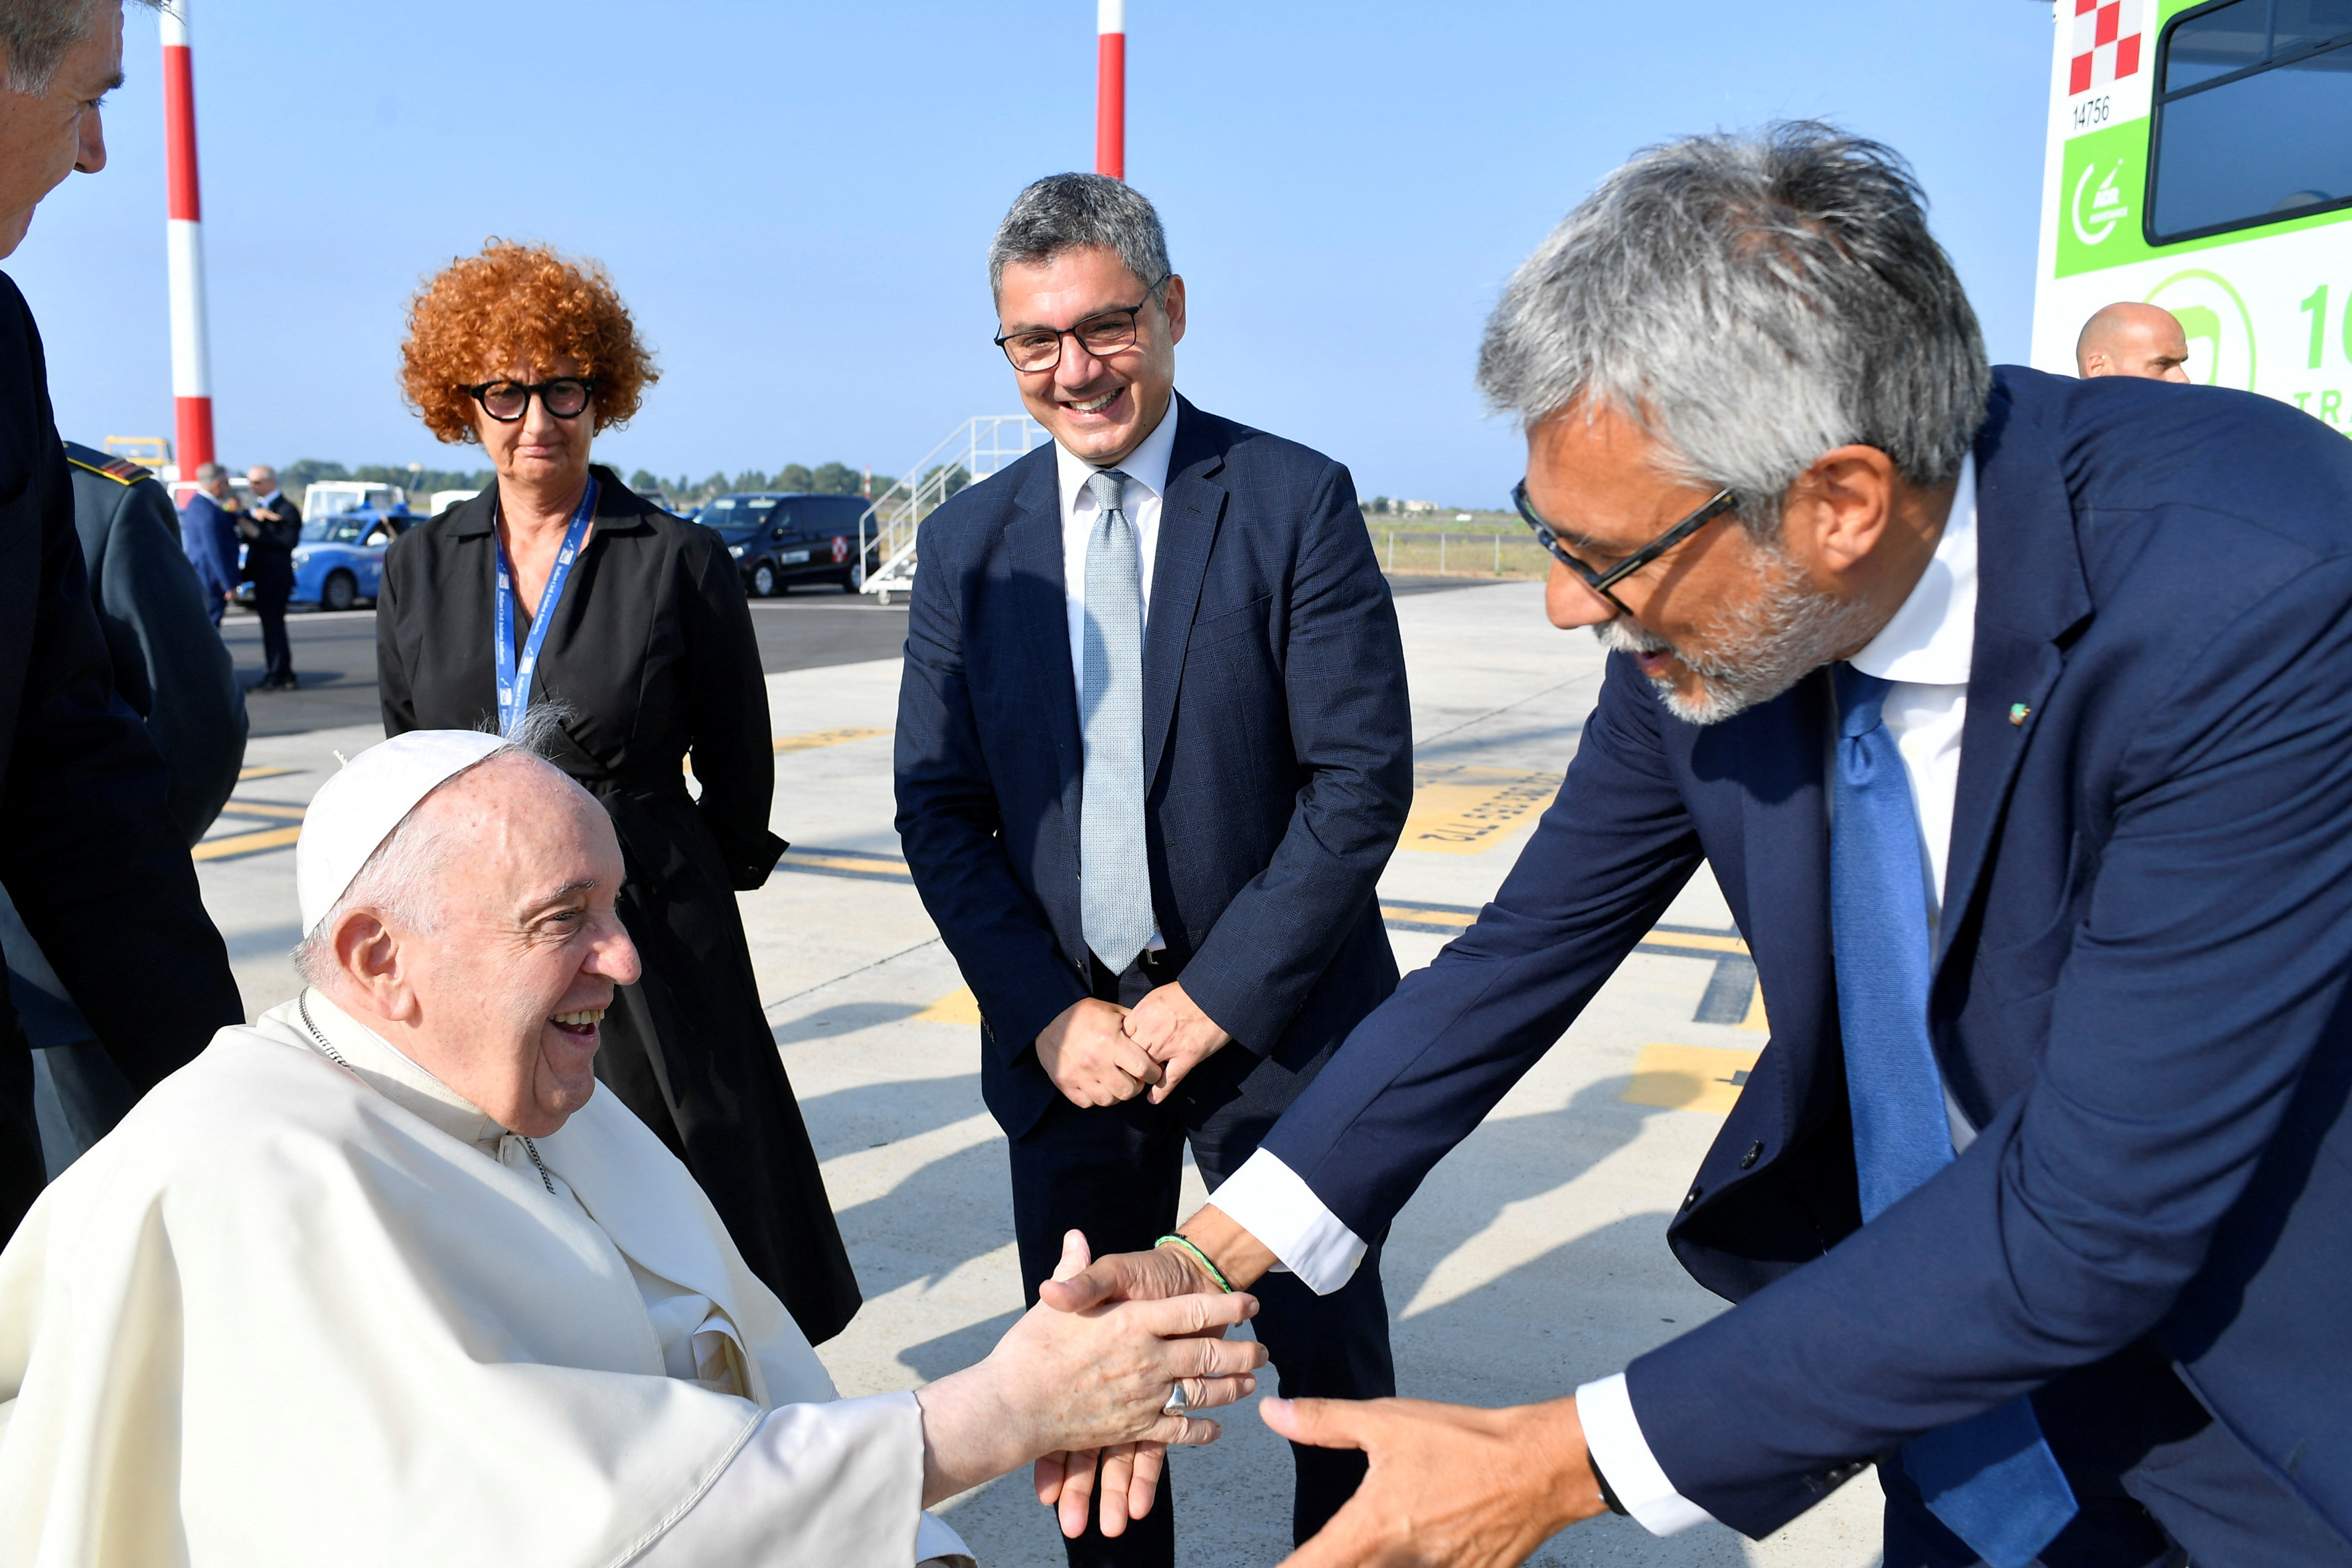 Pope Francis departs for his apostolic visit to Canada